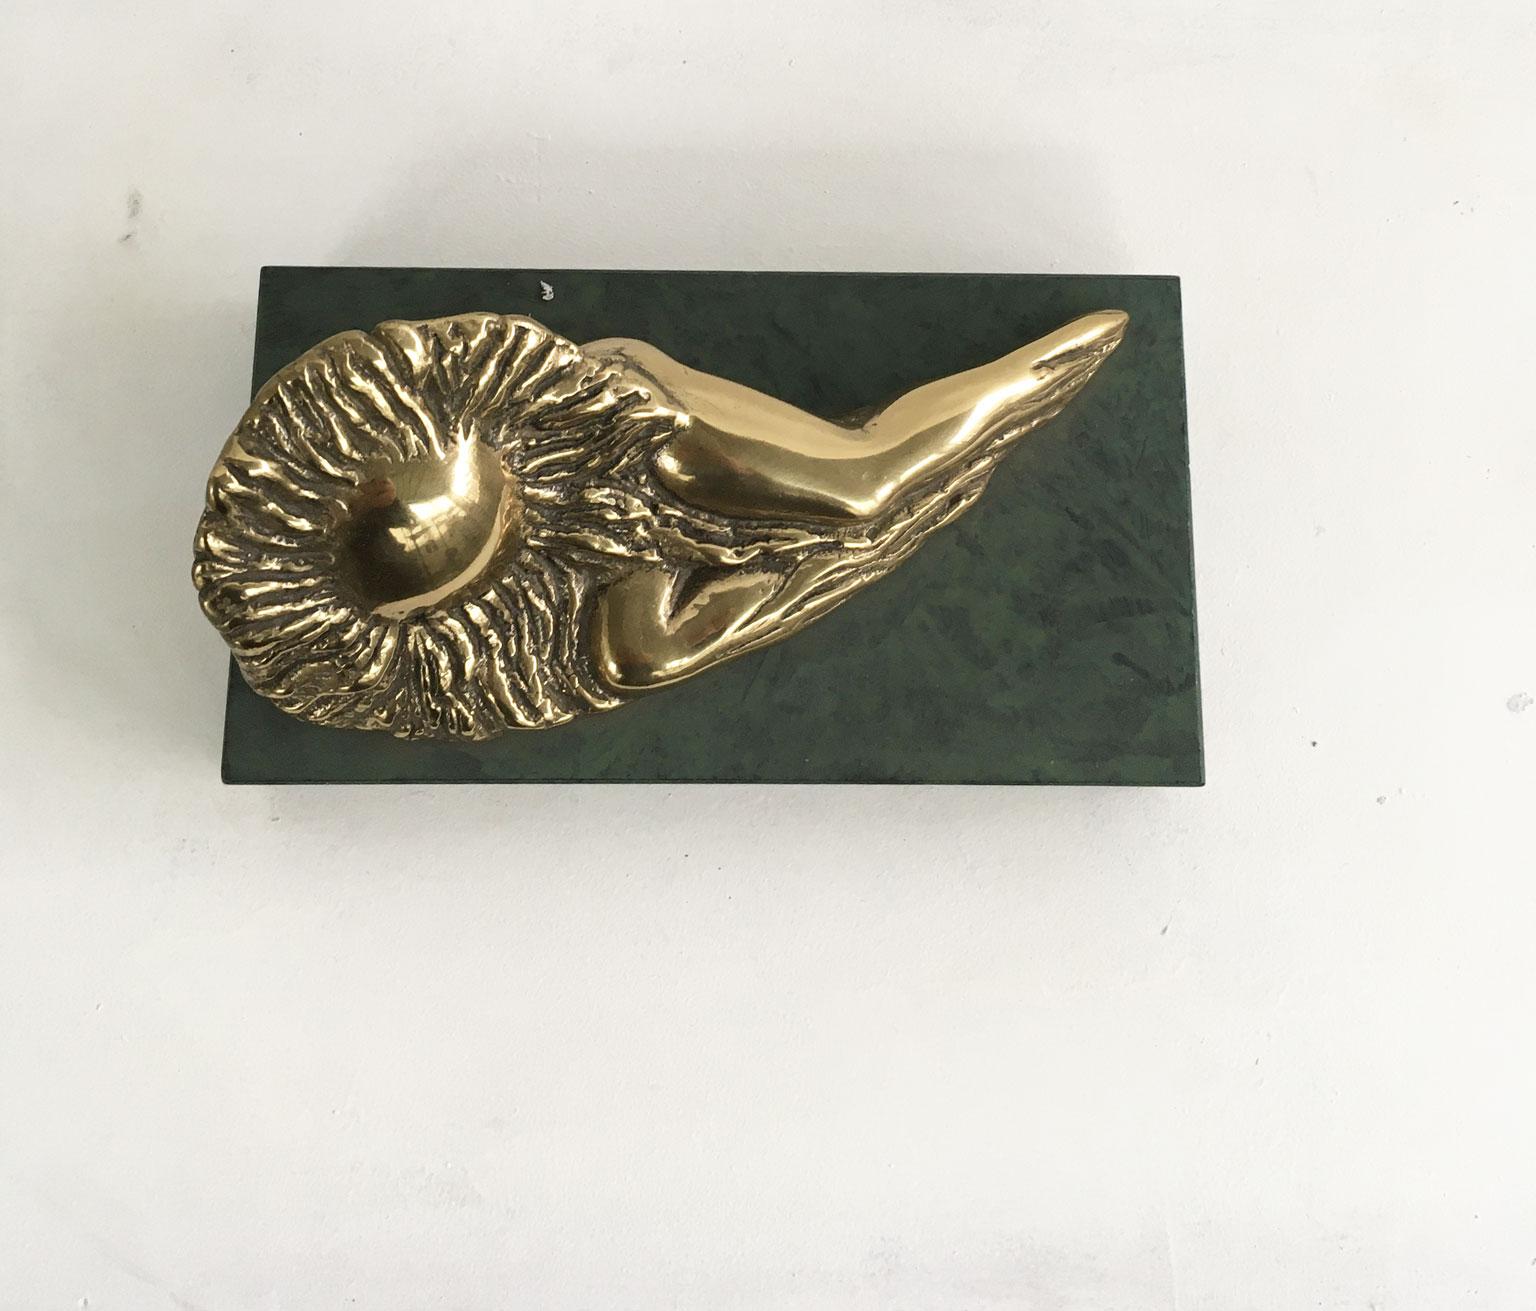 This is an engaging bronze sculpture create by the Italian artist Patrizia Guerresi, in the 1986. The piece is a multiple of 1000 specimen on a green painted wooden base. The title of this artwork is